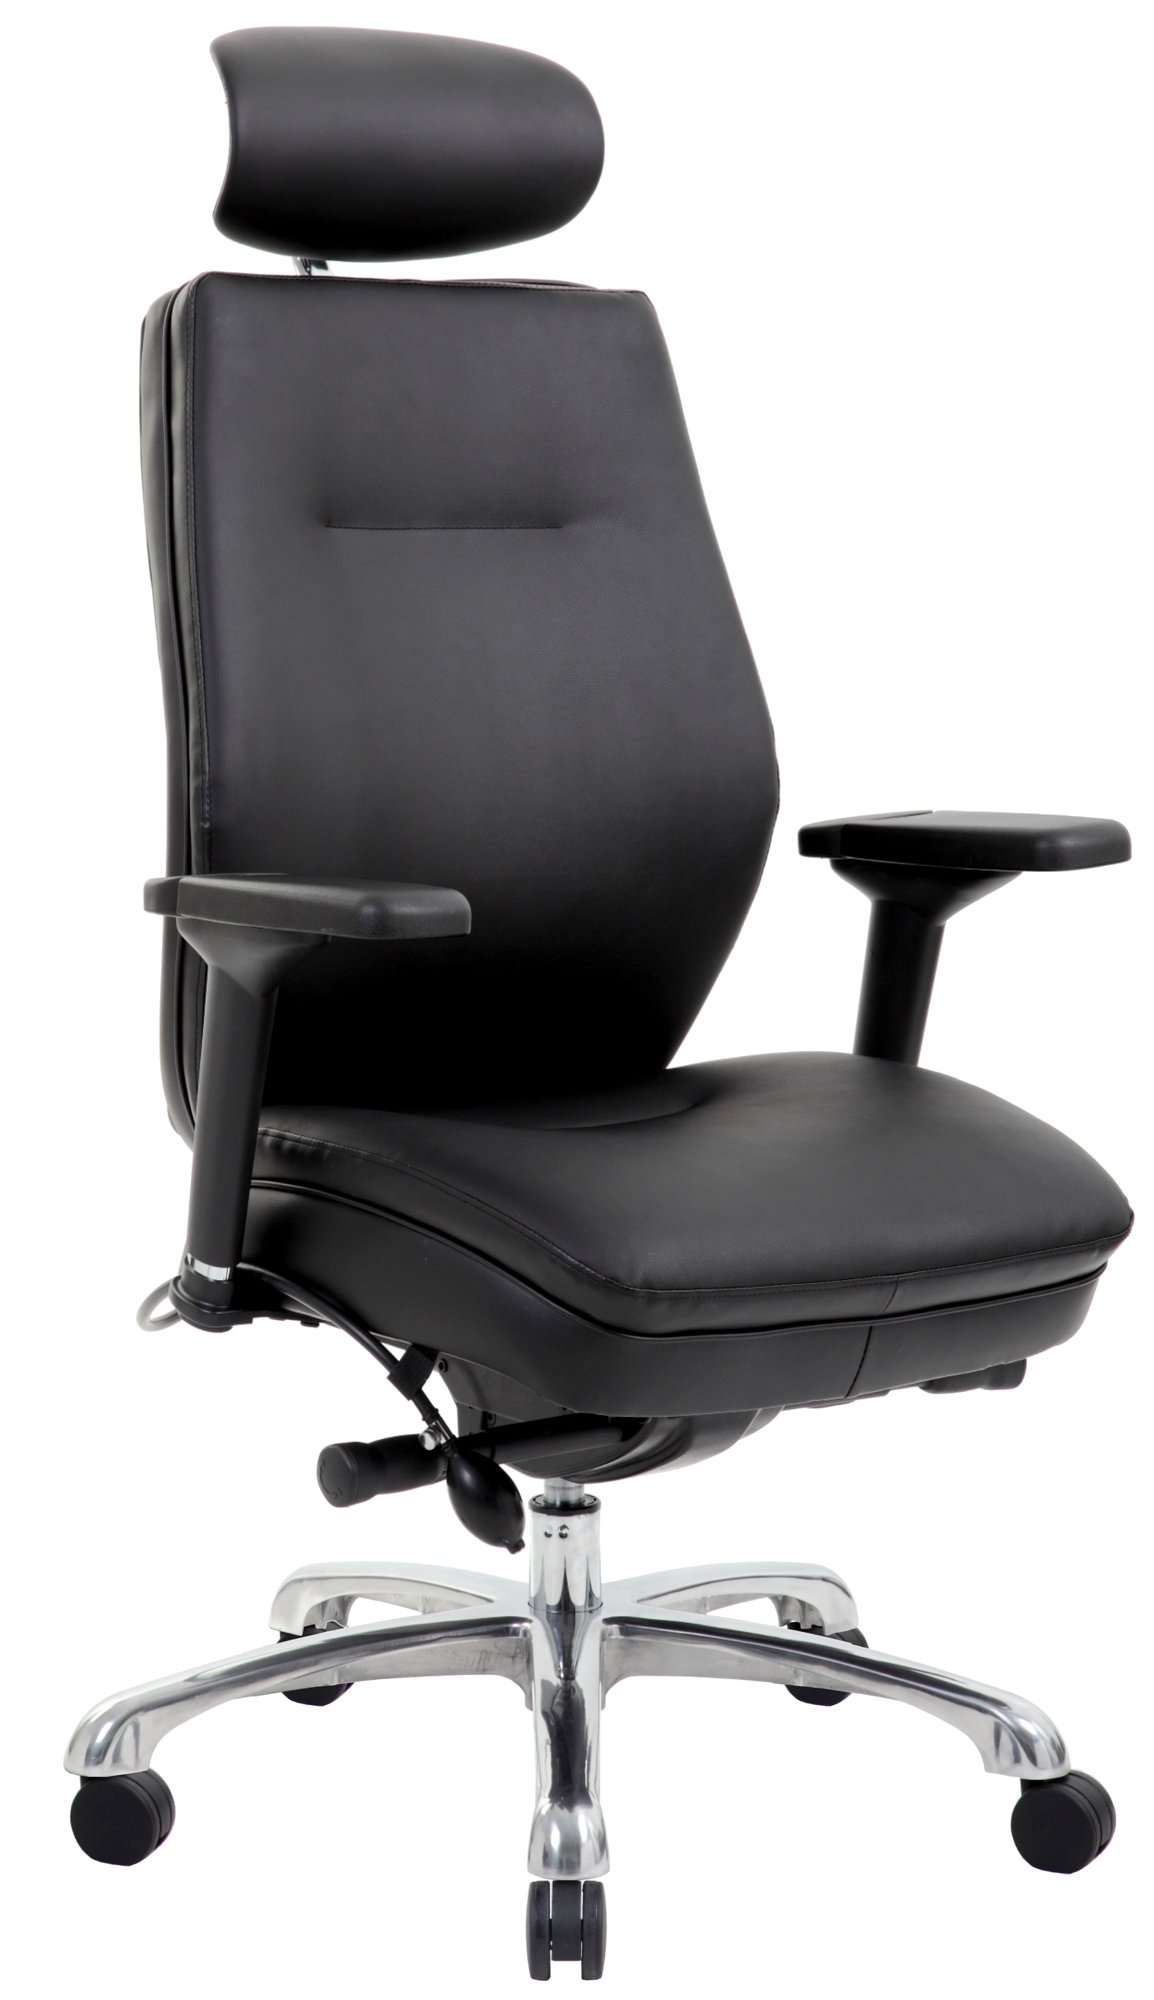 Domino Black Bonded Leather Chair with Headrest PO000065